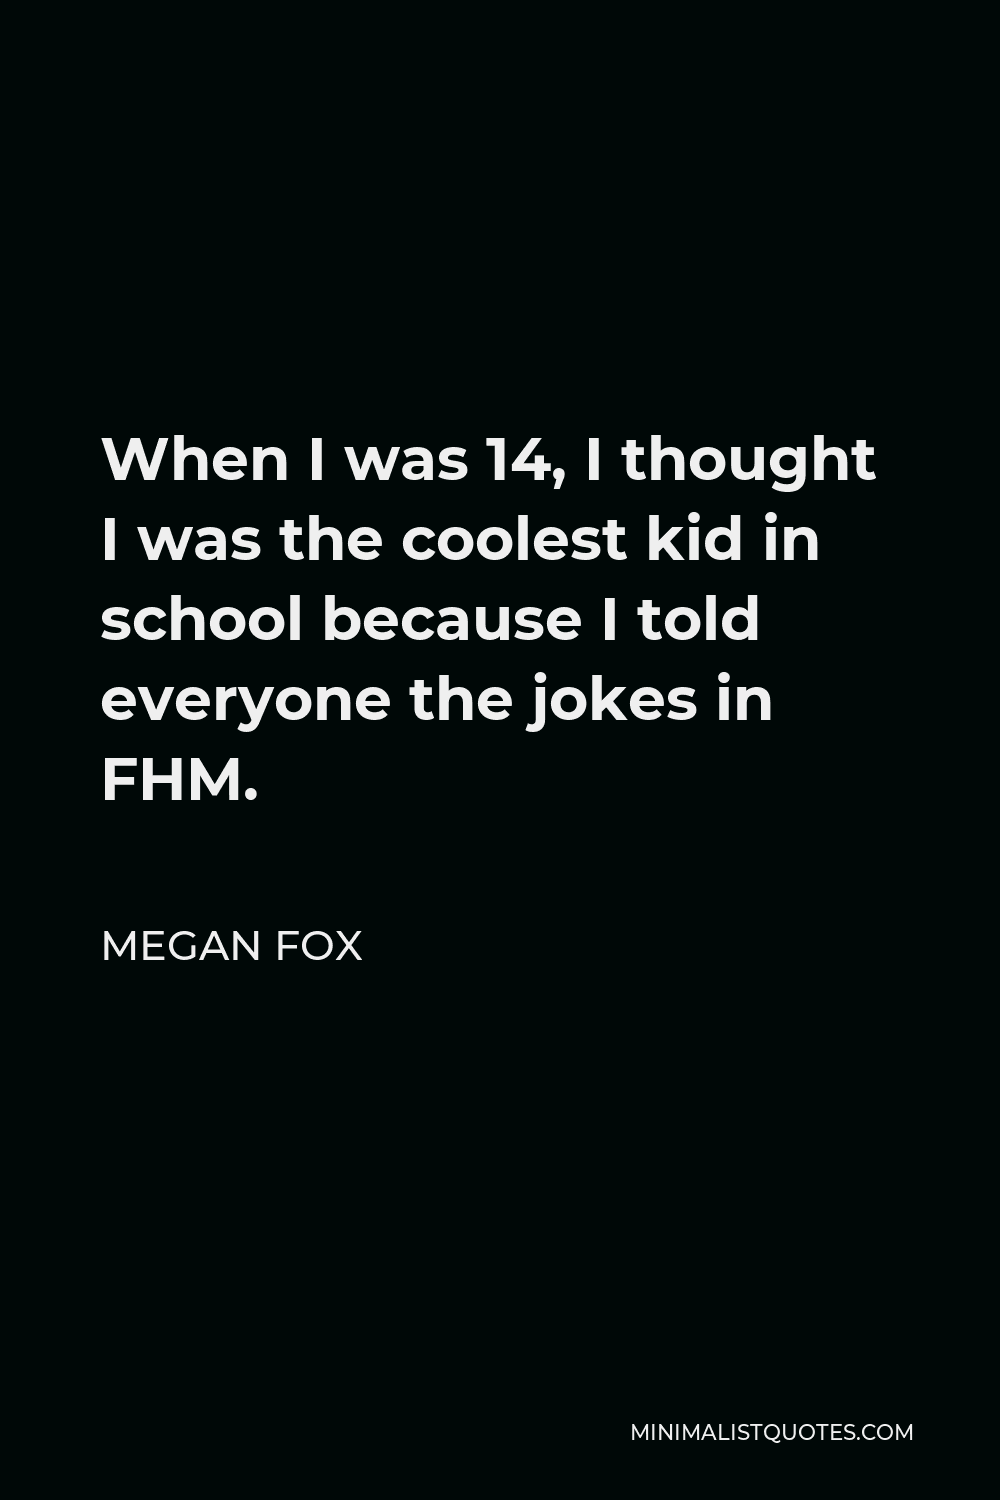 Megan Fox Quote - When I was 14, I thought I was the coolest kid in school because I told everyone the jokes in FHM.